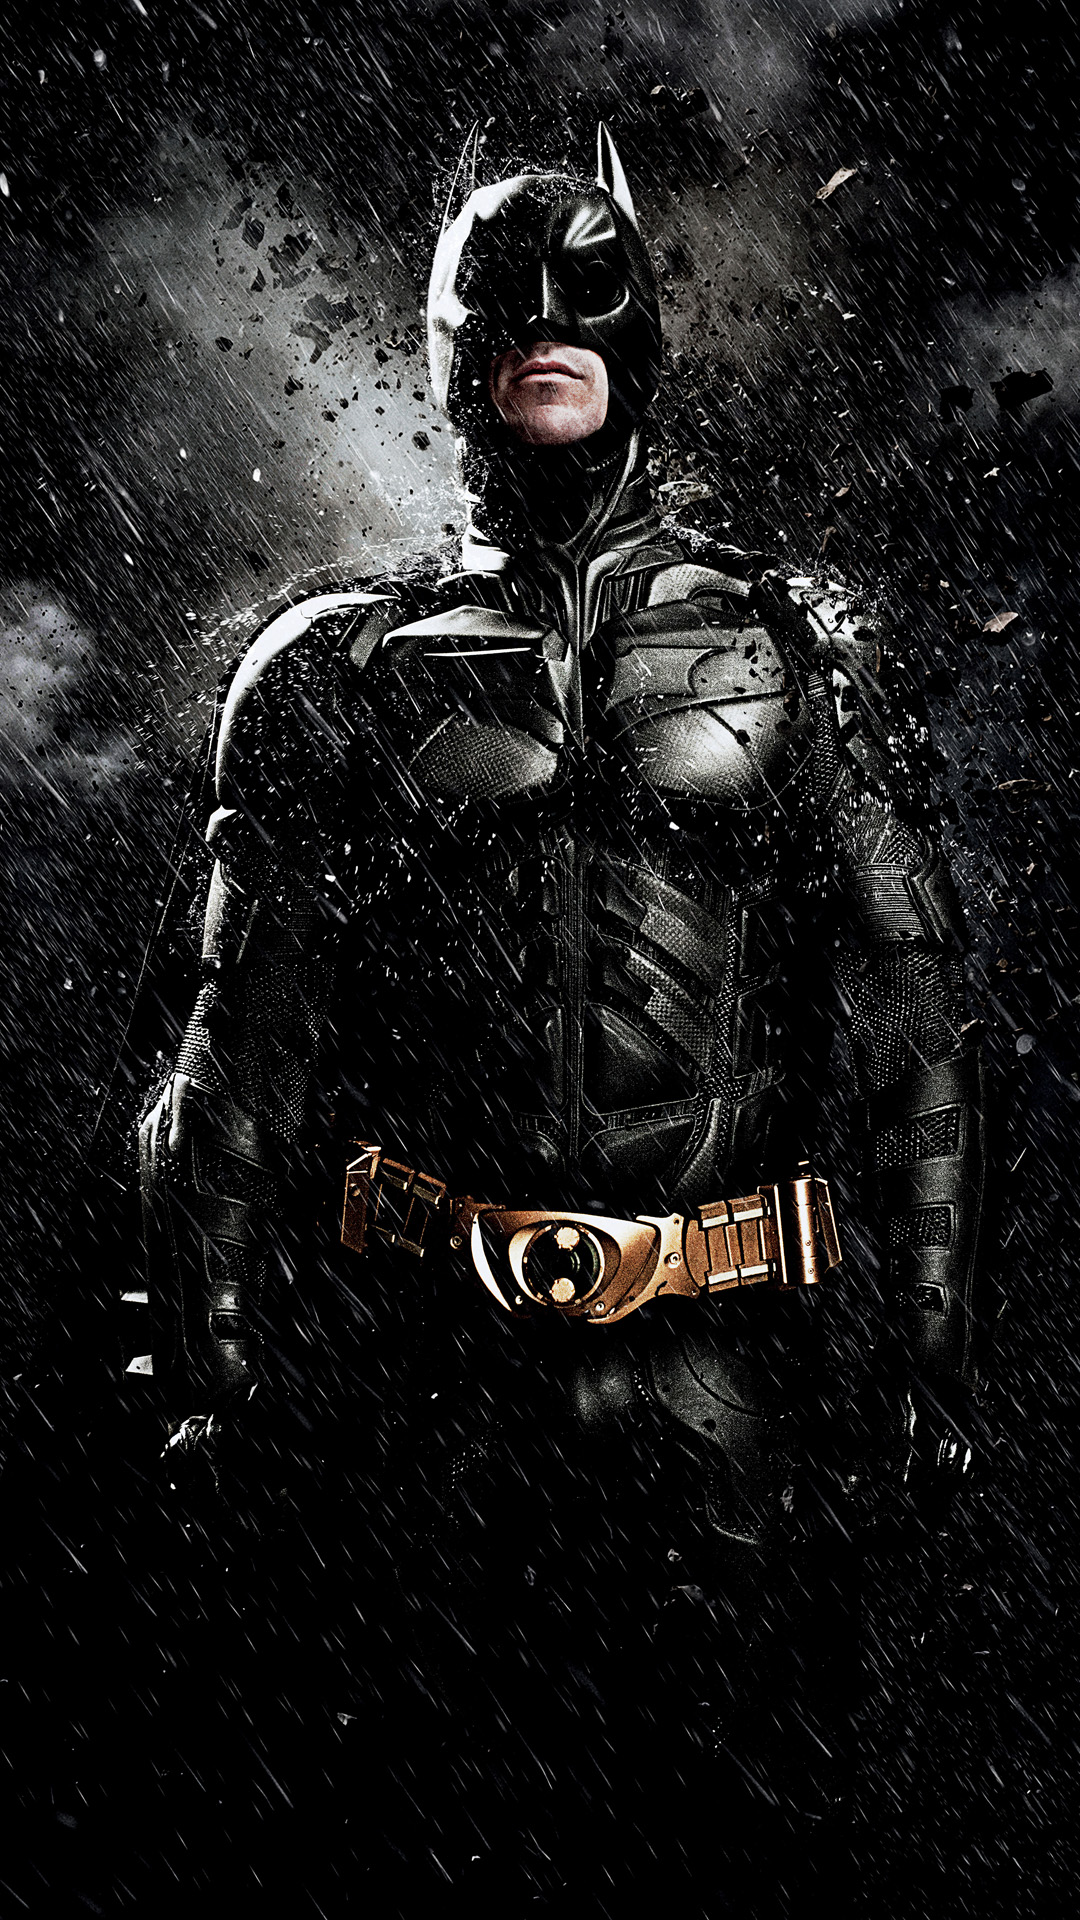 Batman The Dark Knight Rises - Best htc one wallpapers, free and ...